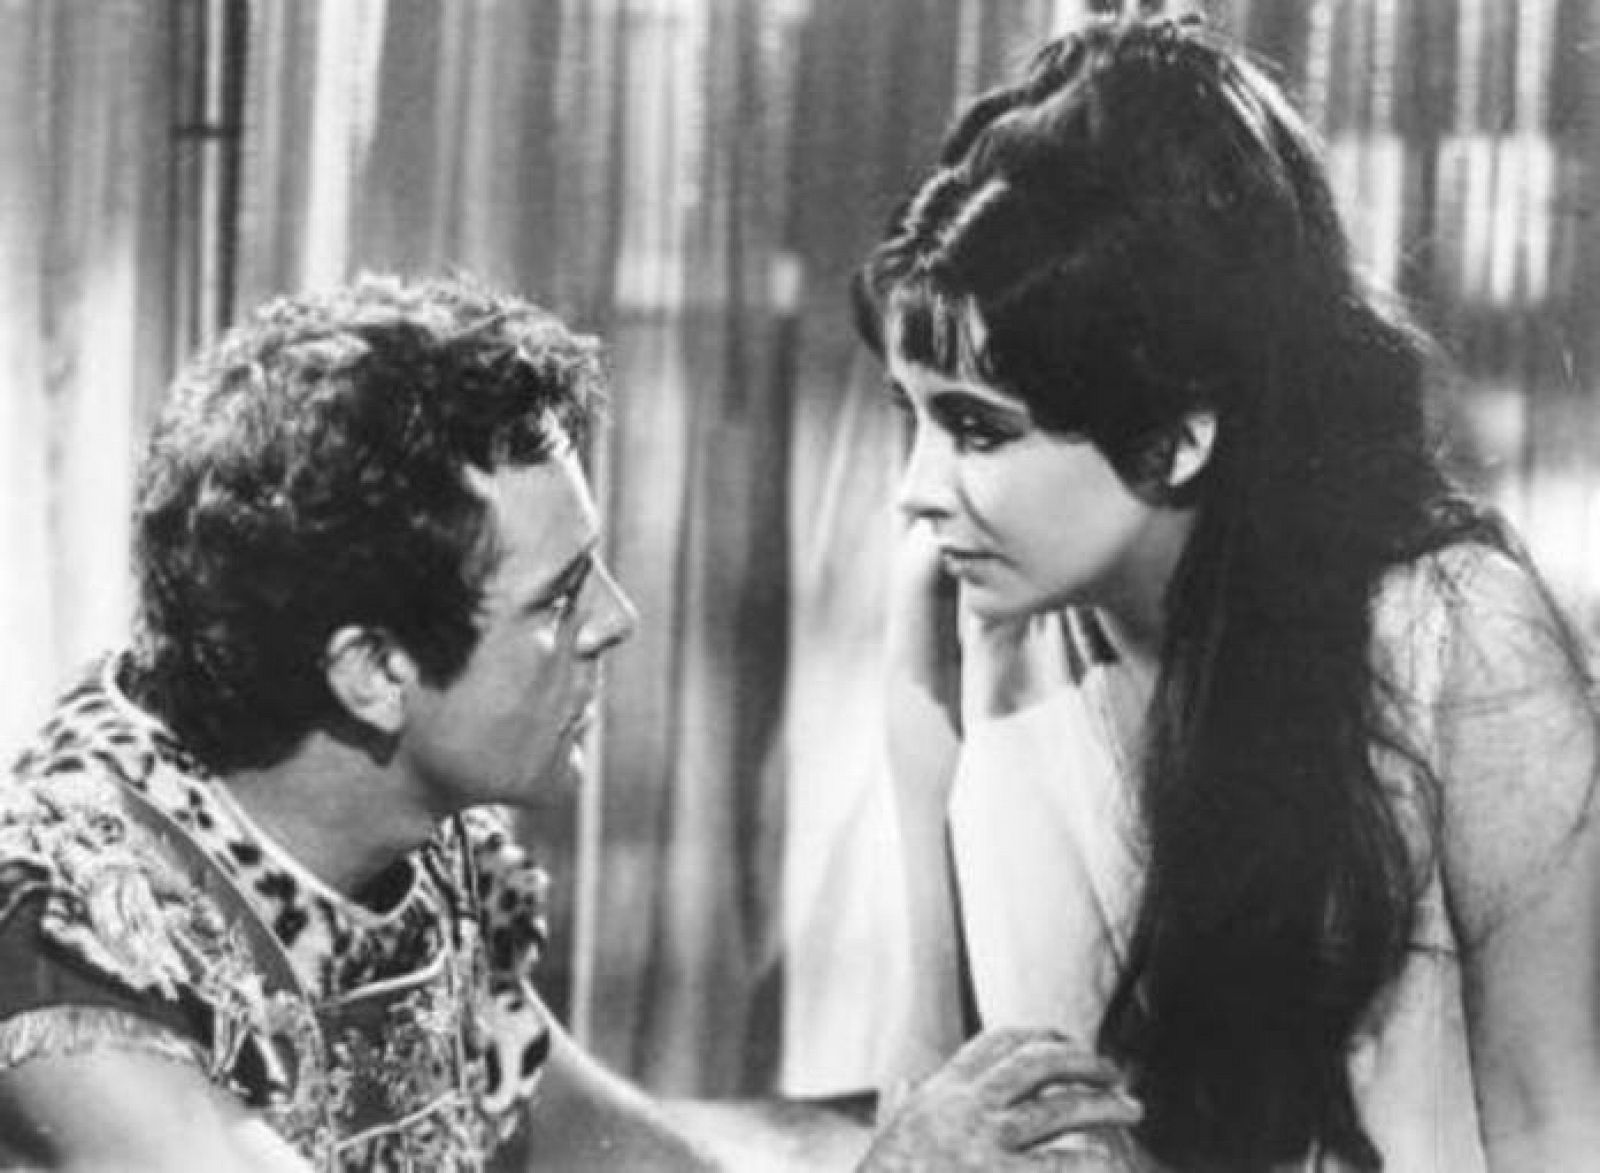 Actress Elizabeth Taylor and Richard Burton are shown in a scene from her 1963 film Cleopatra